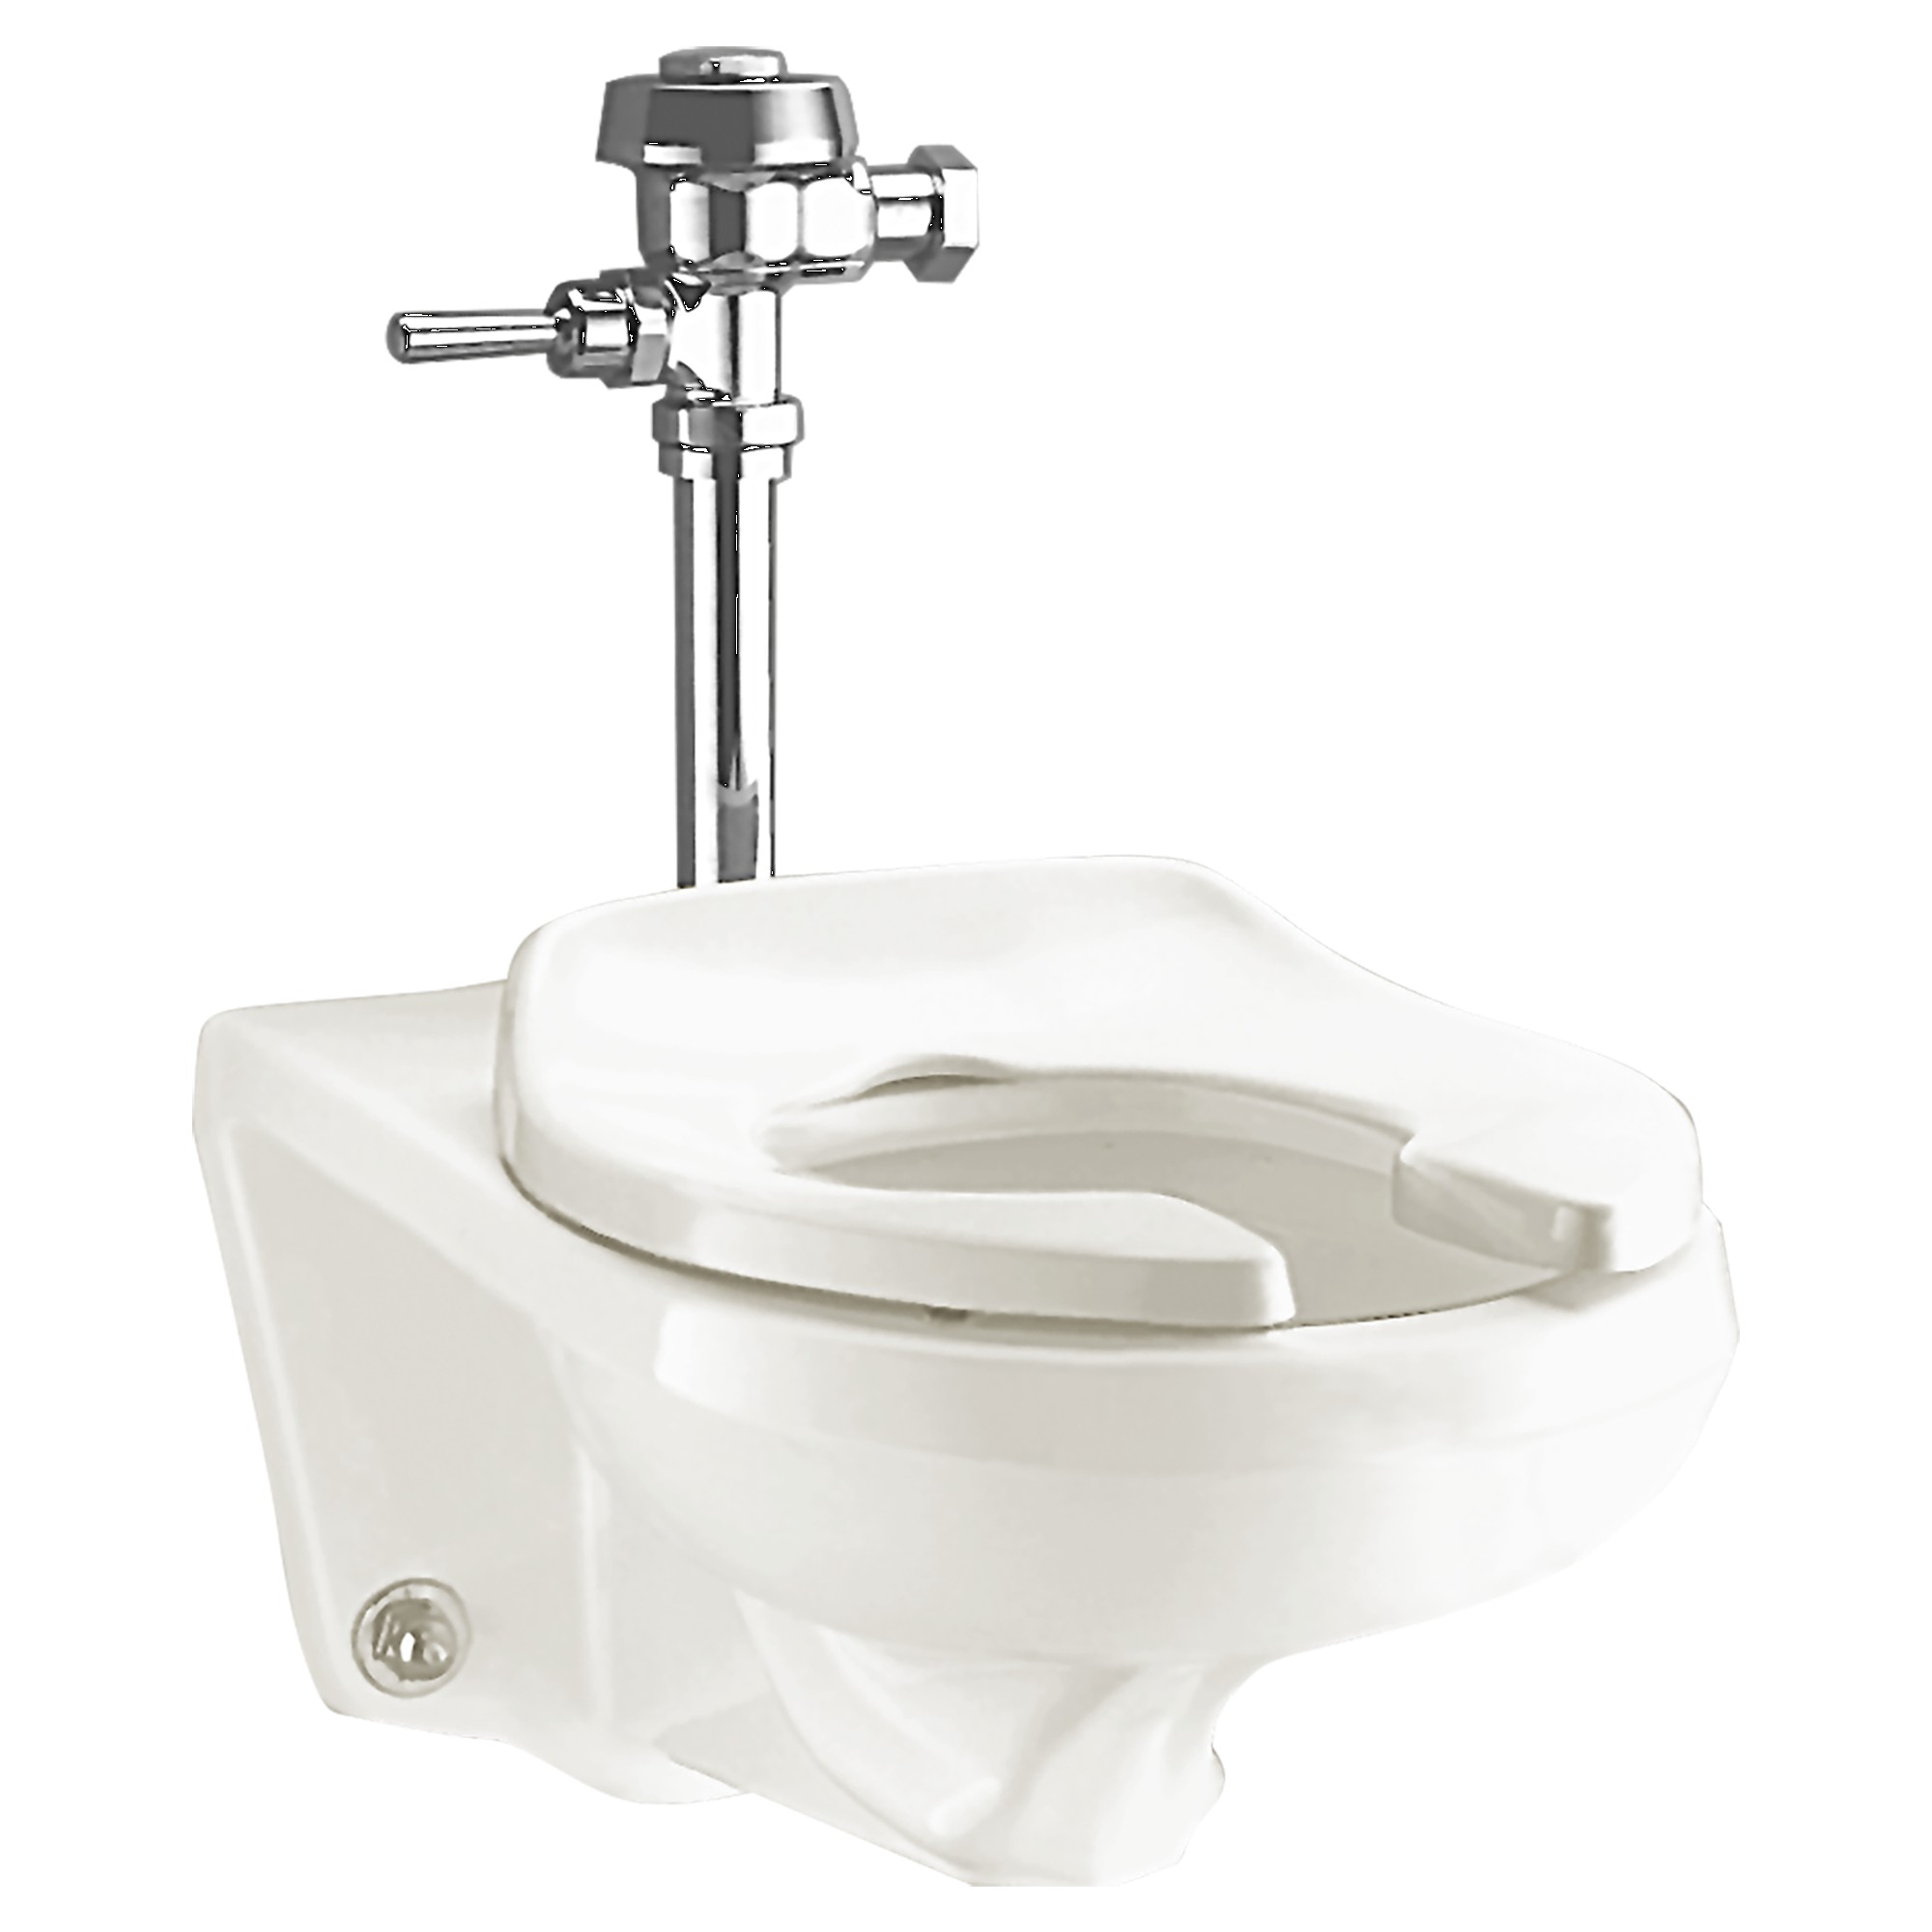 Carrier-Mounted Wall Outlet Siphon Jet Series Toilet, 4-bolt Carrier